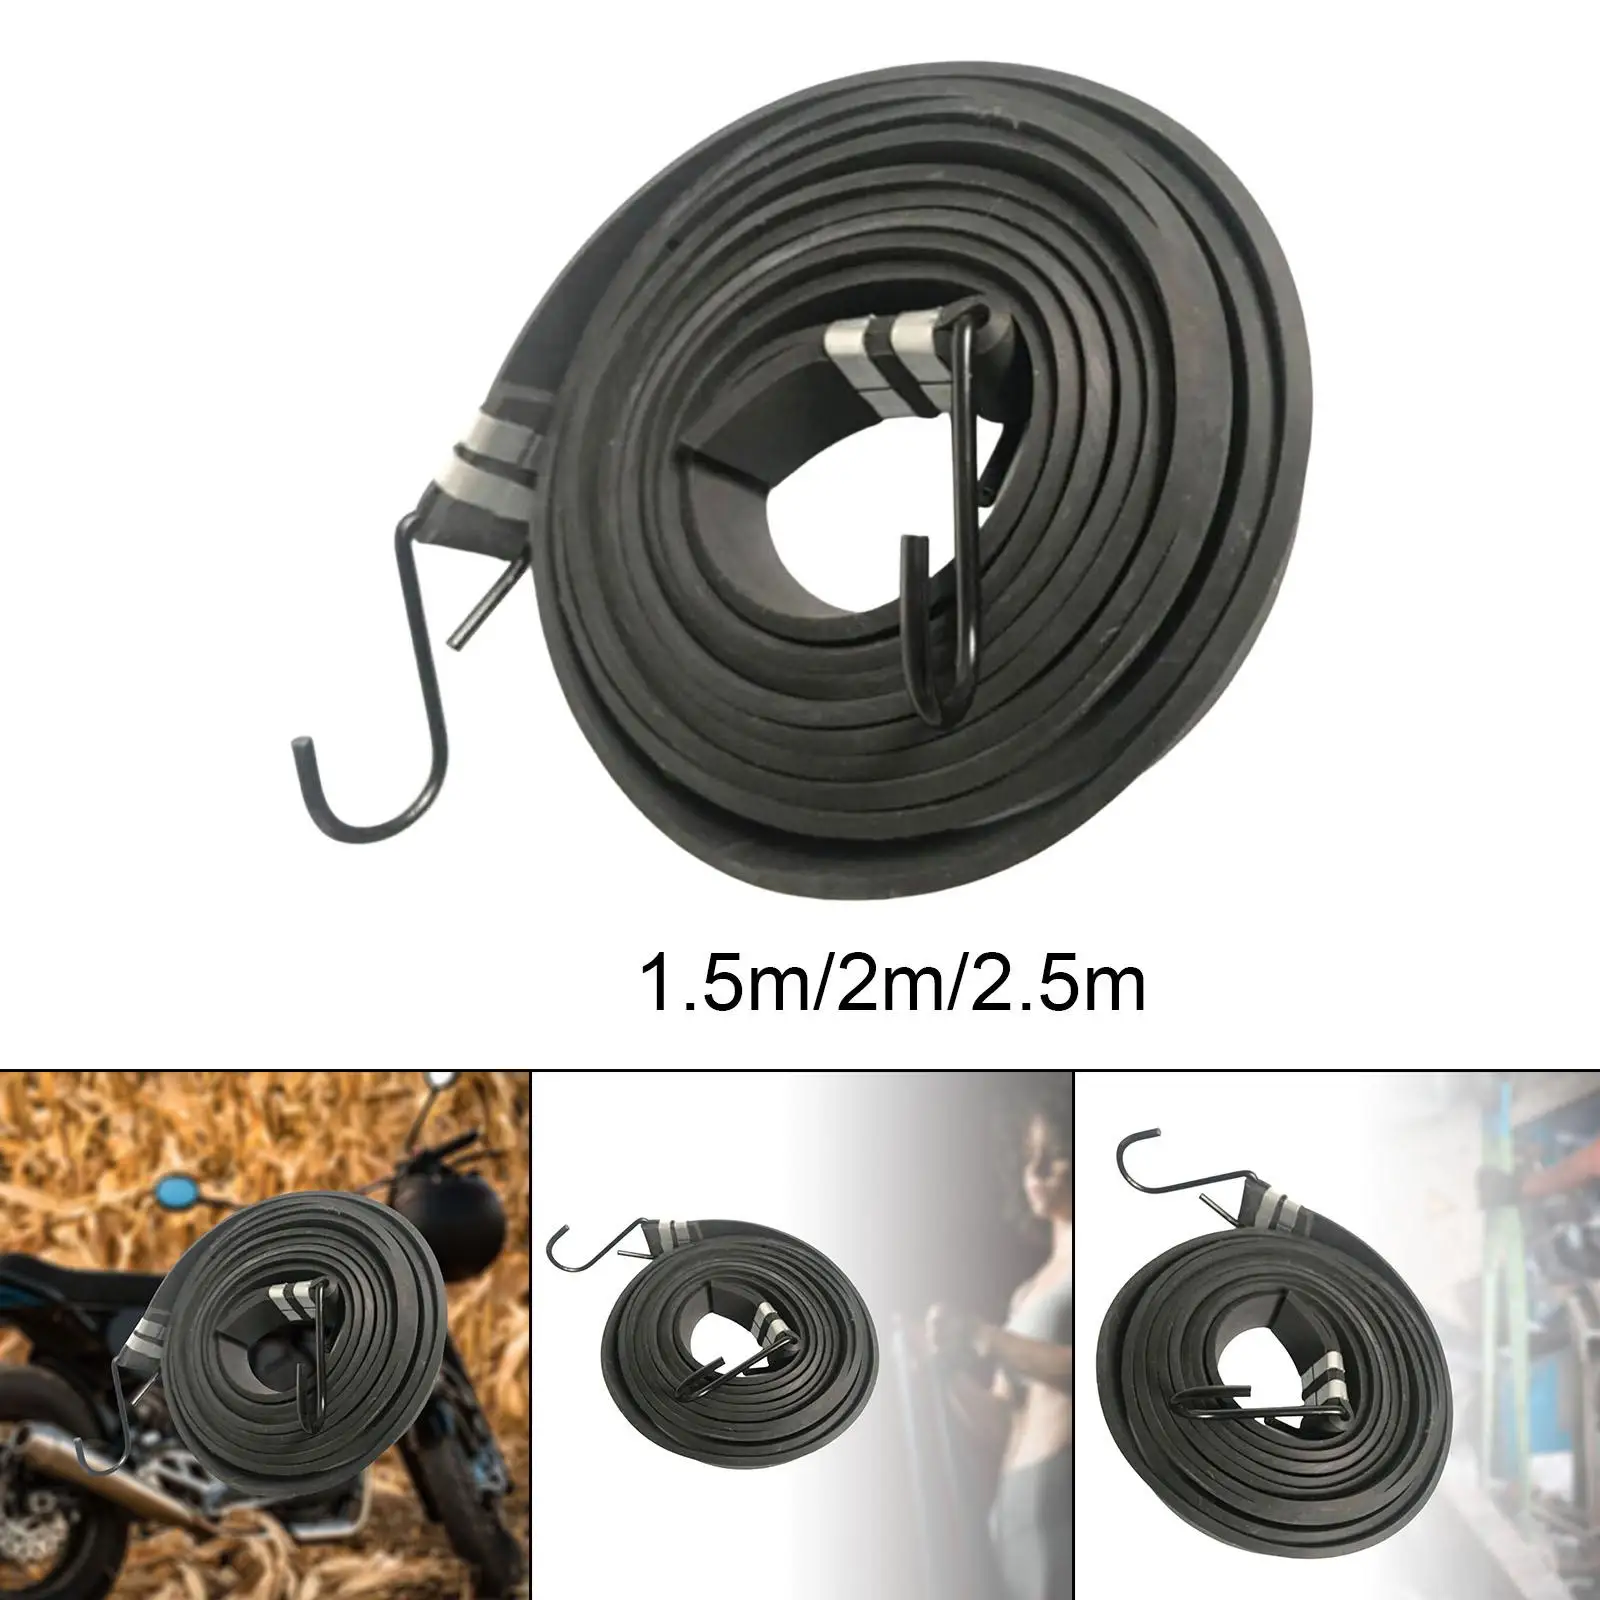 Thick Widened Flat Rubber Strap Bungee Cords with Hooks S Hooks Both End Fittings Design Easy to Install Long Lasting Adjustable